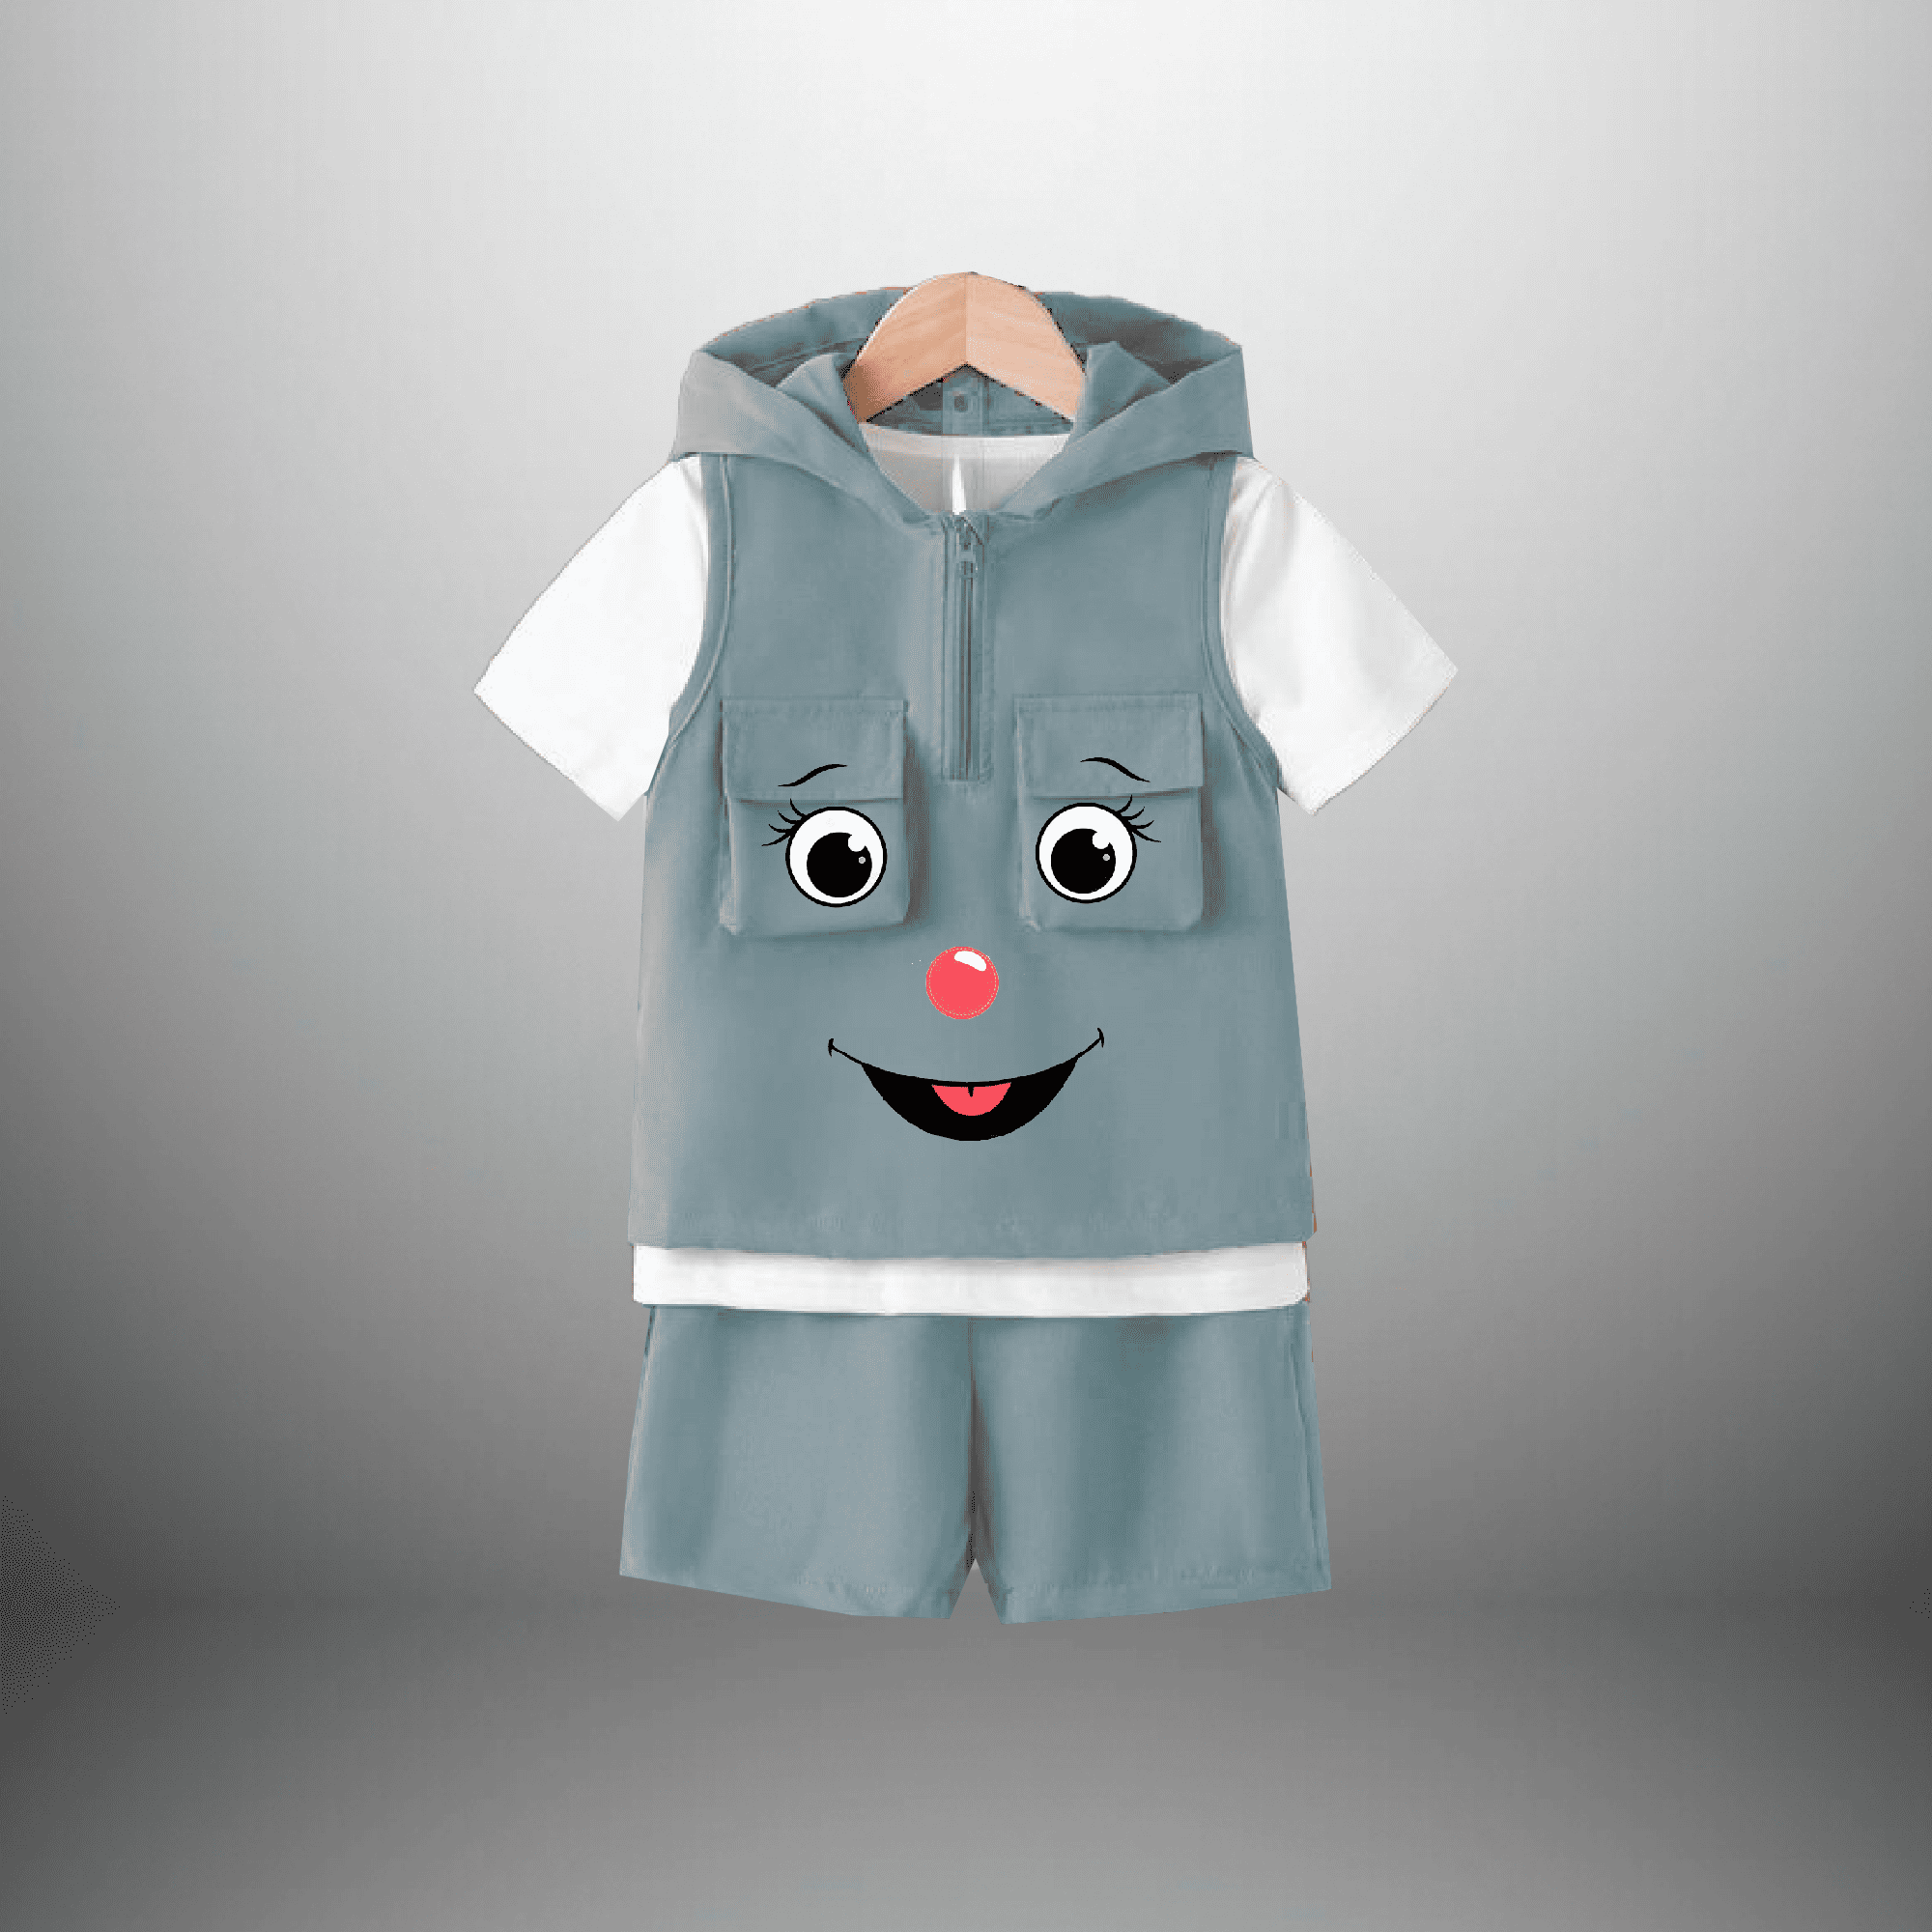 Boy's 3 piece set with white  t-shirt, Sky Grey shorts and a sleeveless Hooded jacket-RKFCW491